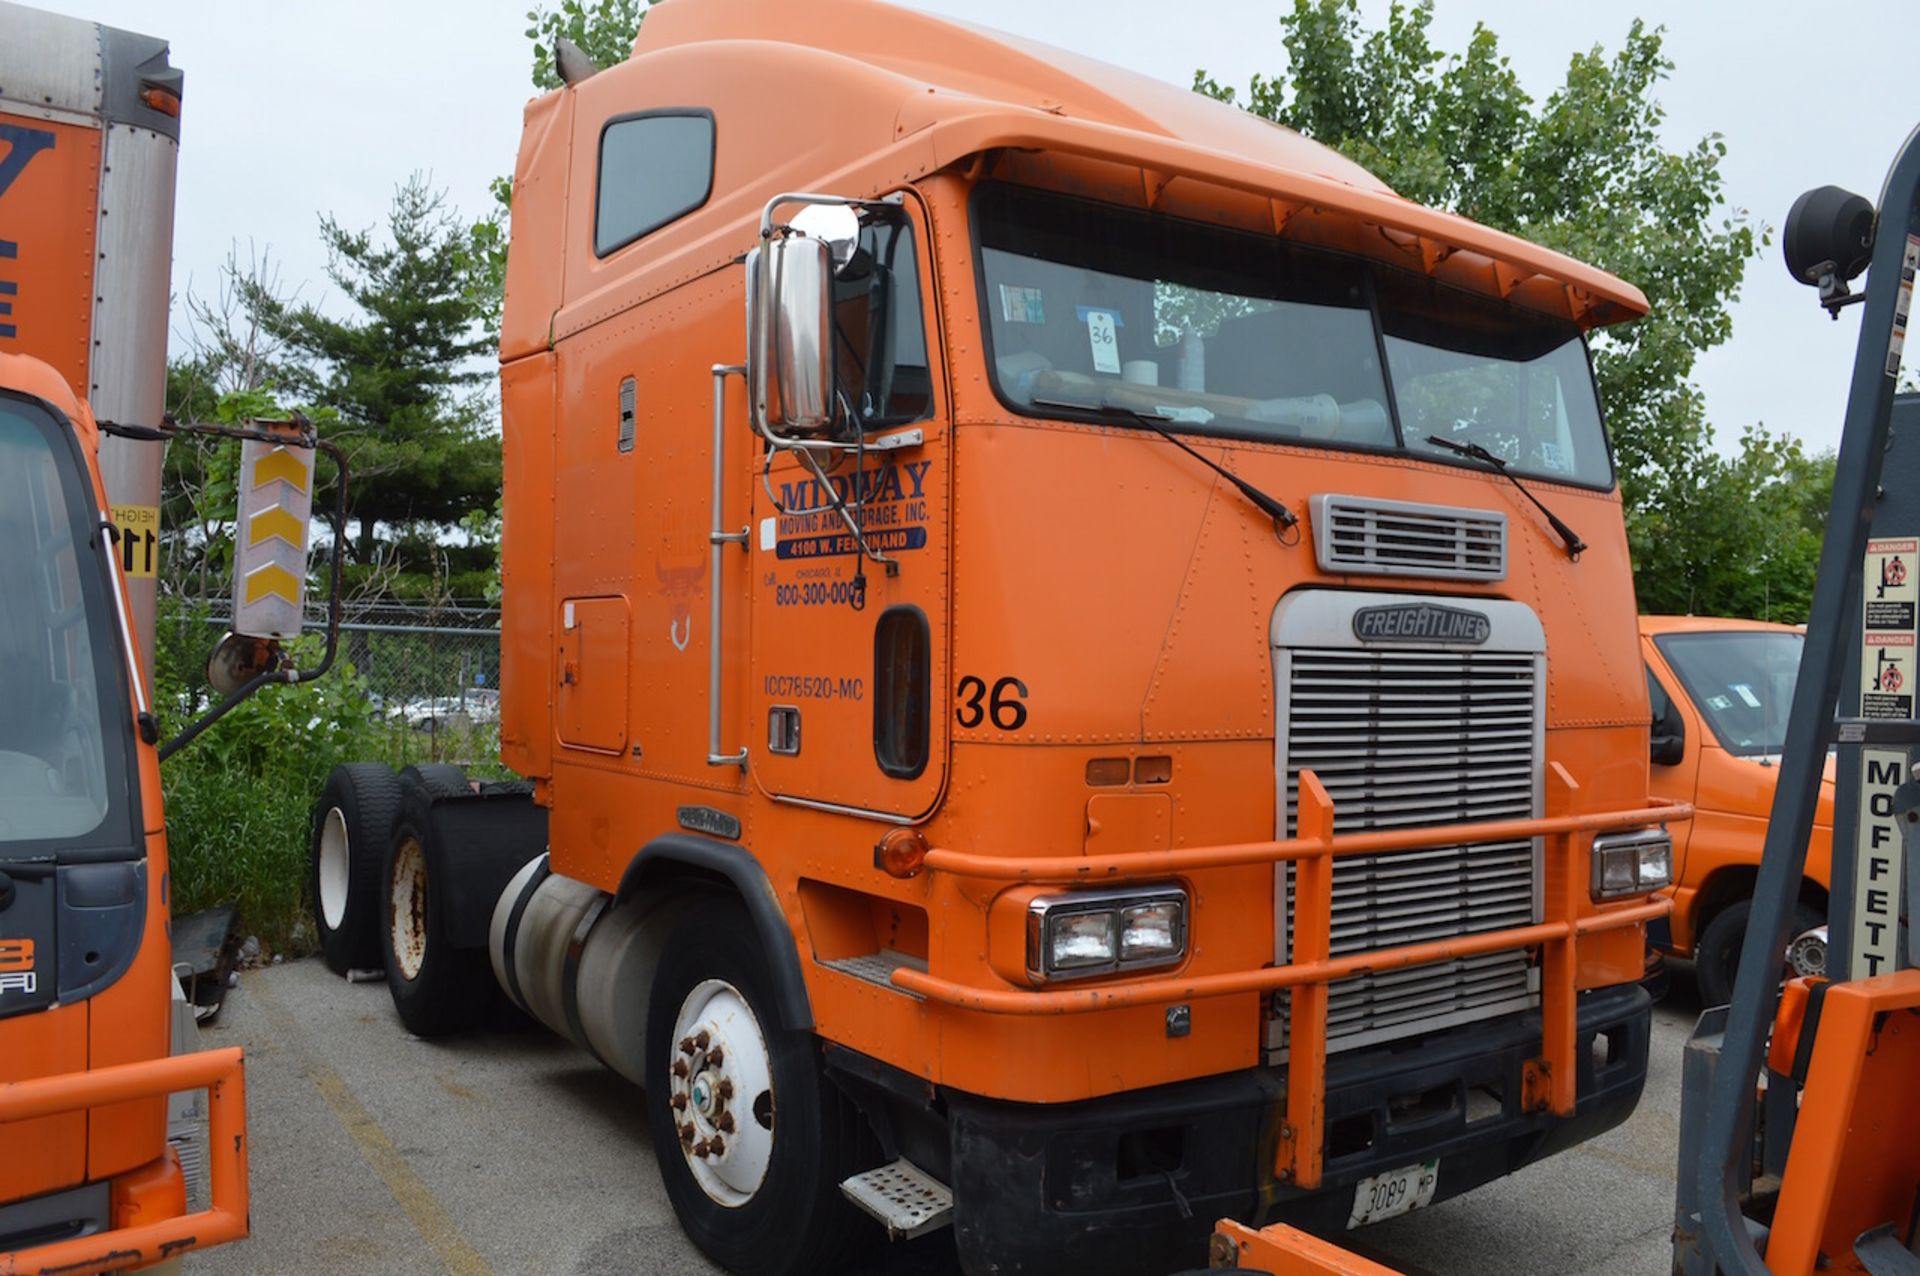 1990 FREIGHTLINER TANDEM AXLE TWIN SCREW DIESEL CAB OVER TRACTOR: VIN NO. 1FUYAZYB6MP504956; Detroit - Image 2 of 6